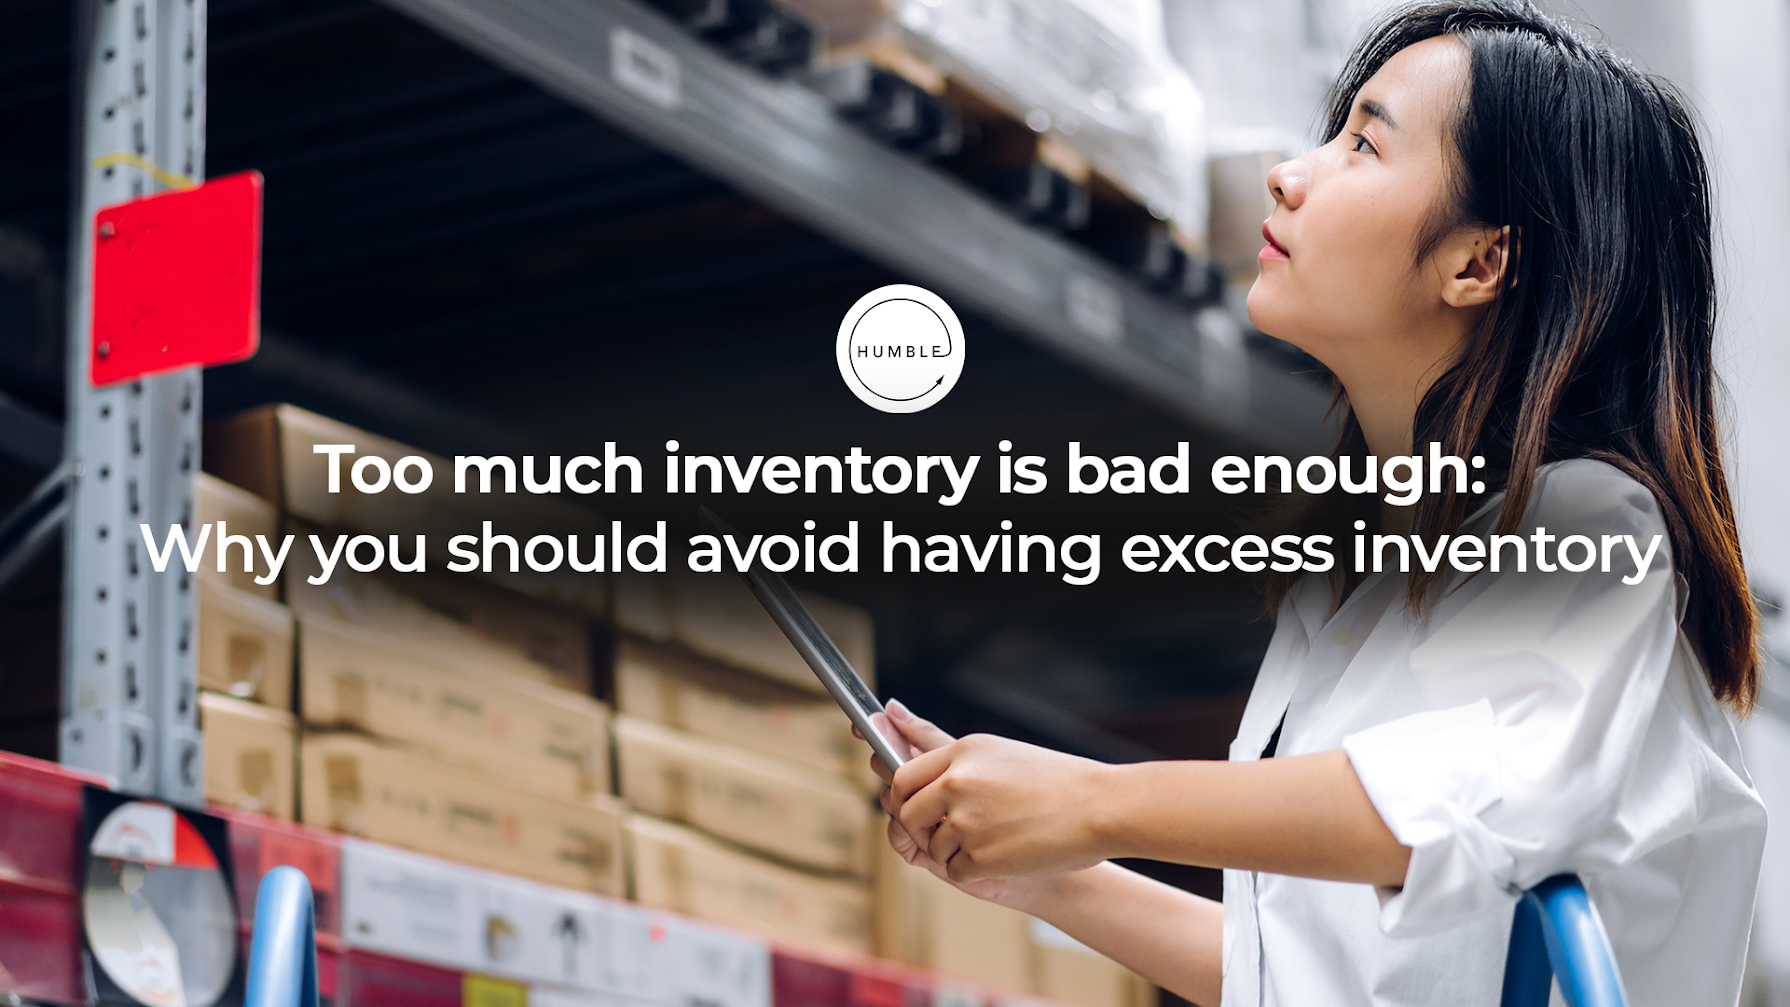 Too much inventory is bad enough: Why you should avoid having excess inventory